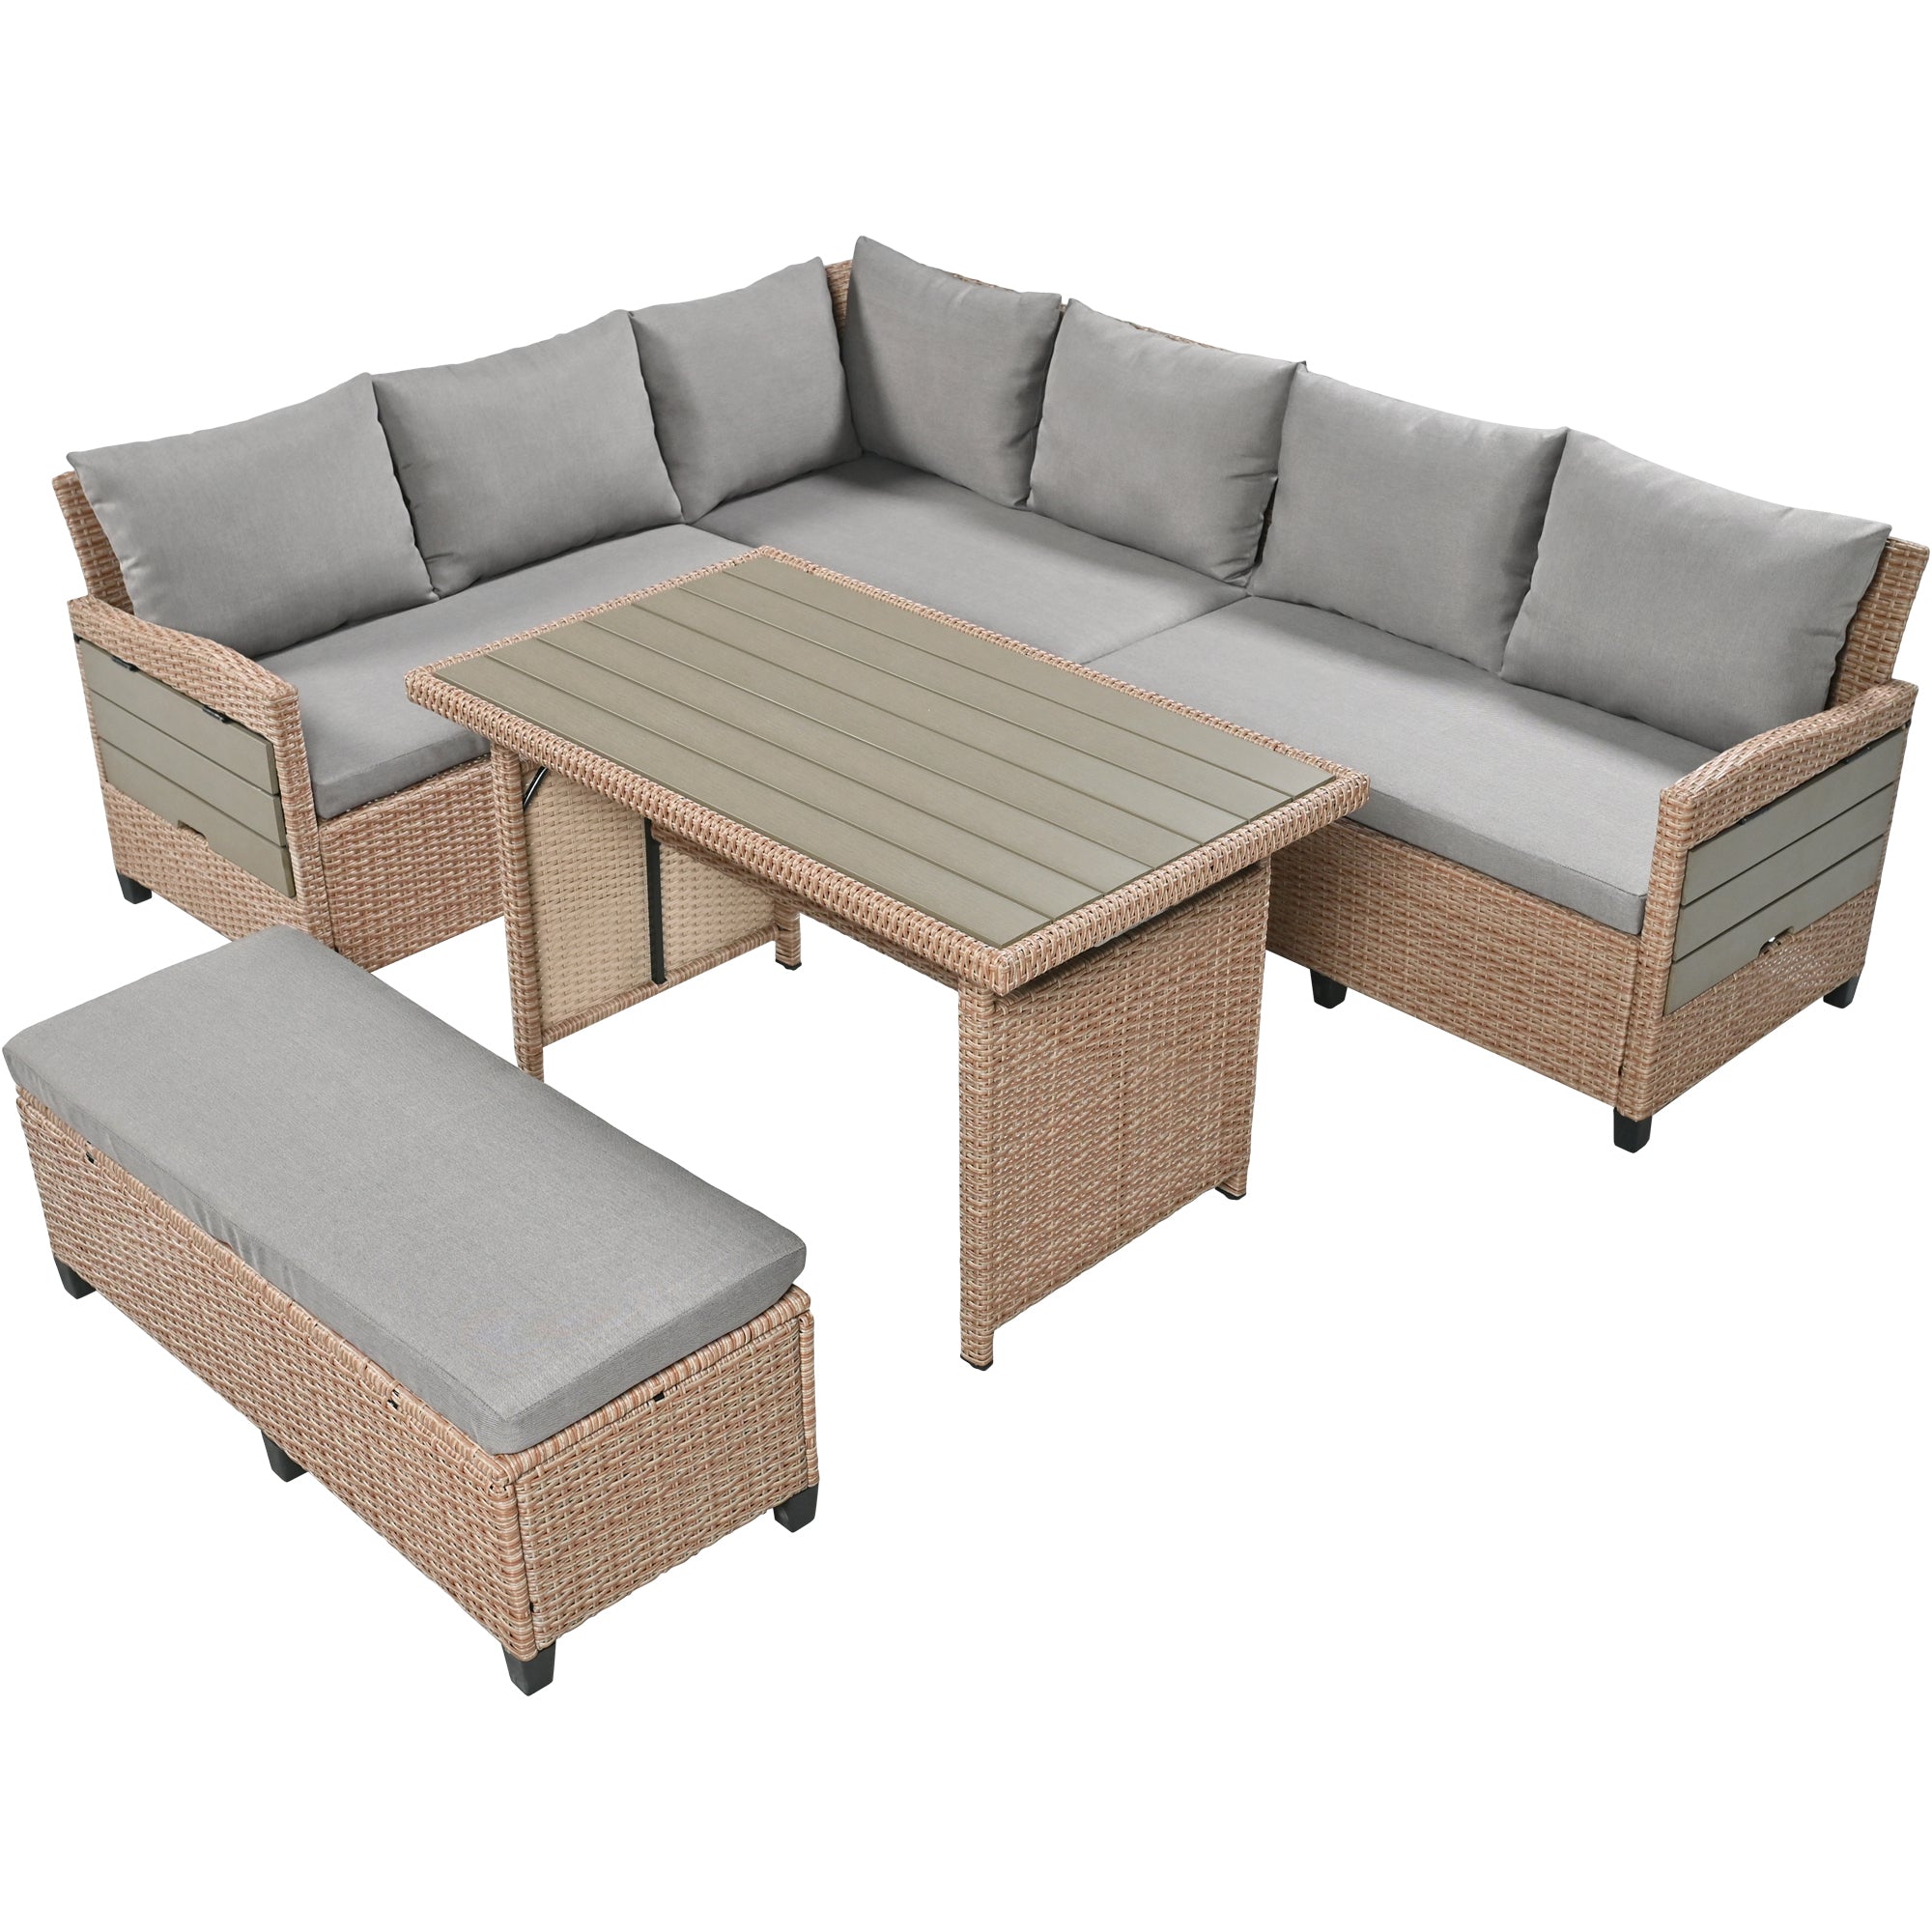 5-Piece Patio Dining Set with 2 Extendable Side Tables, Dining Table and Washable Covers, Brown